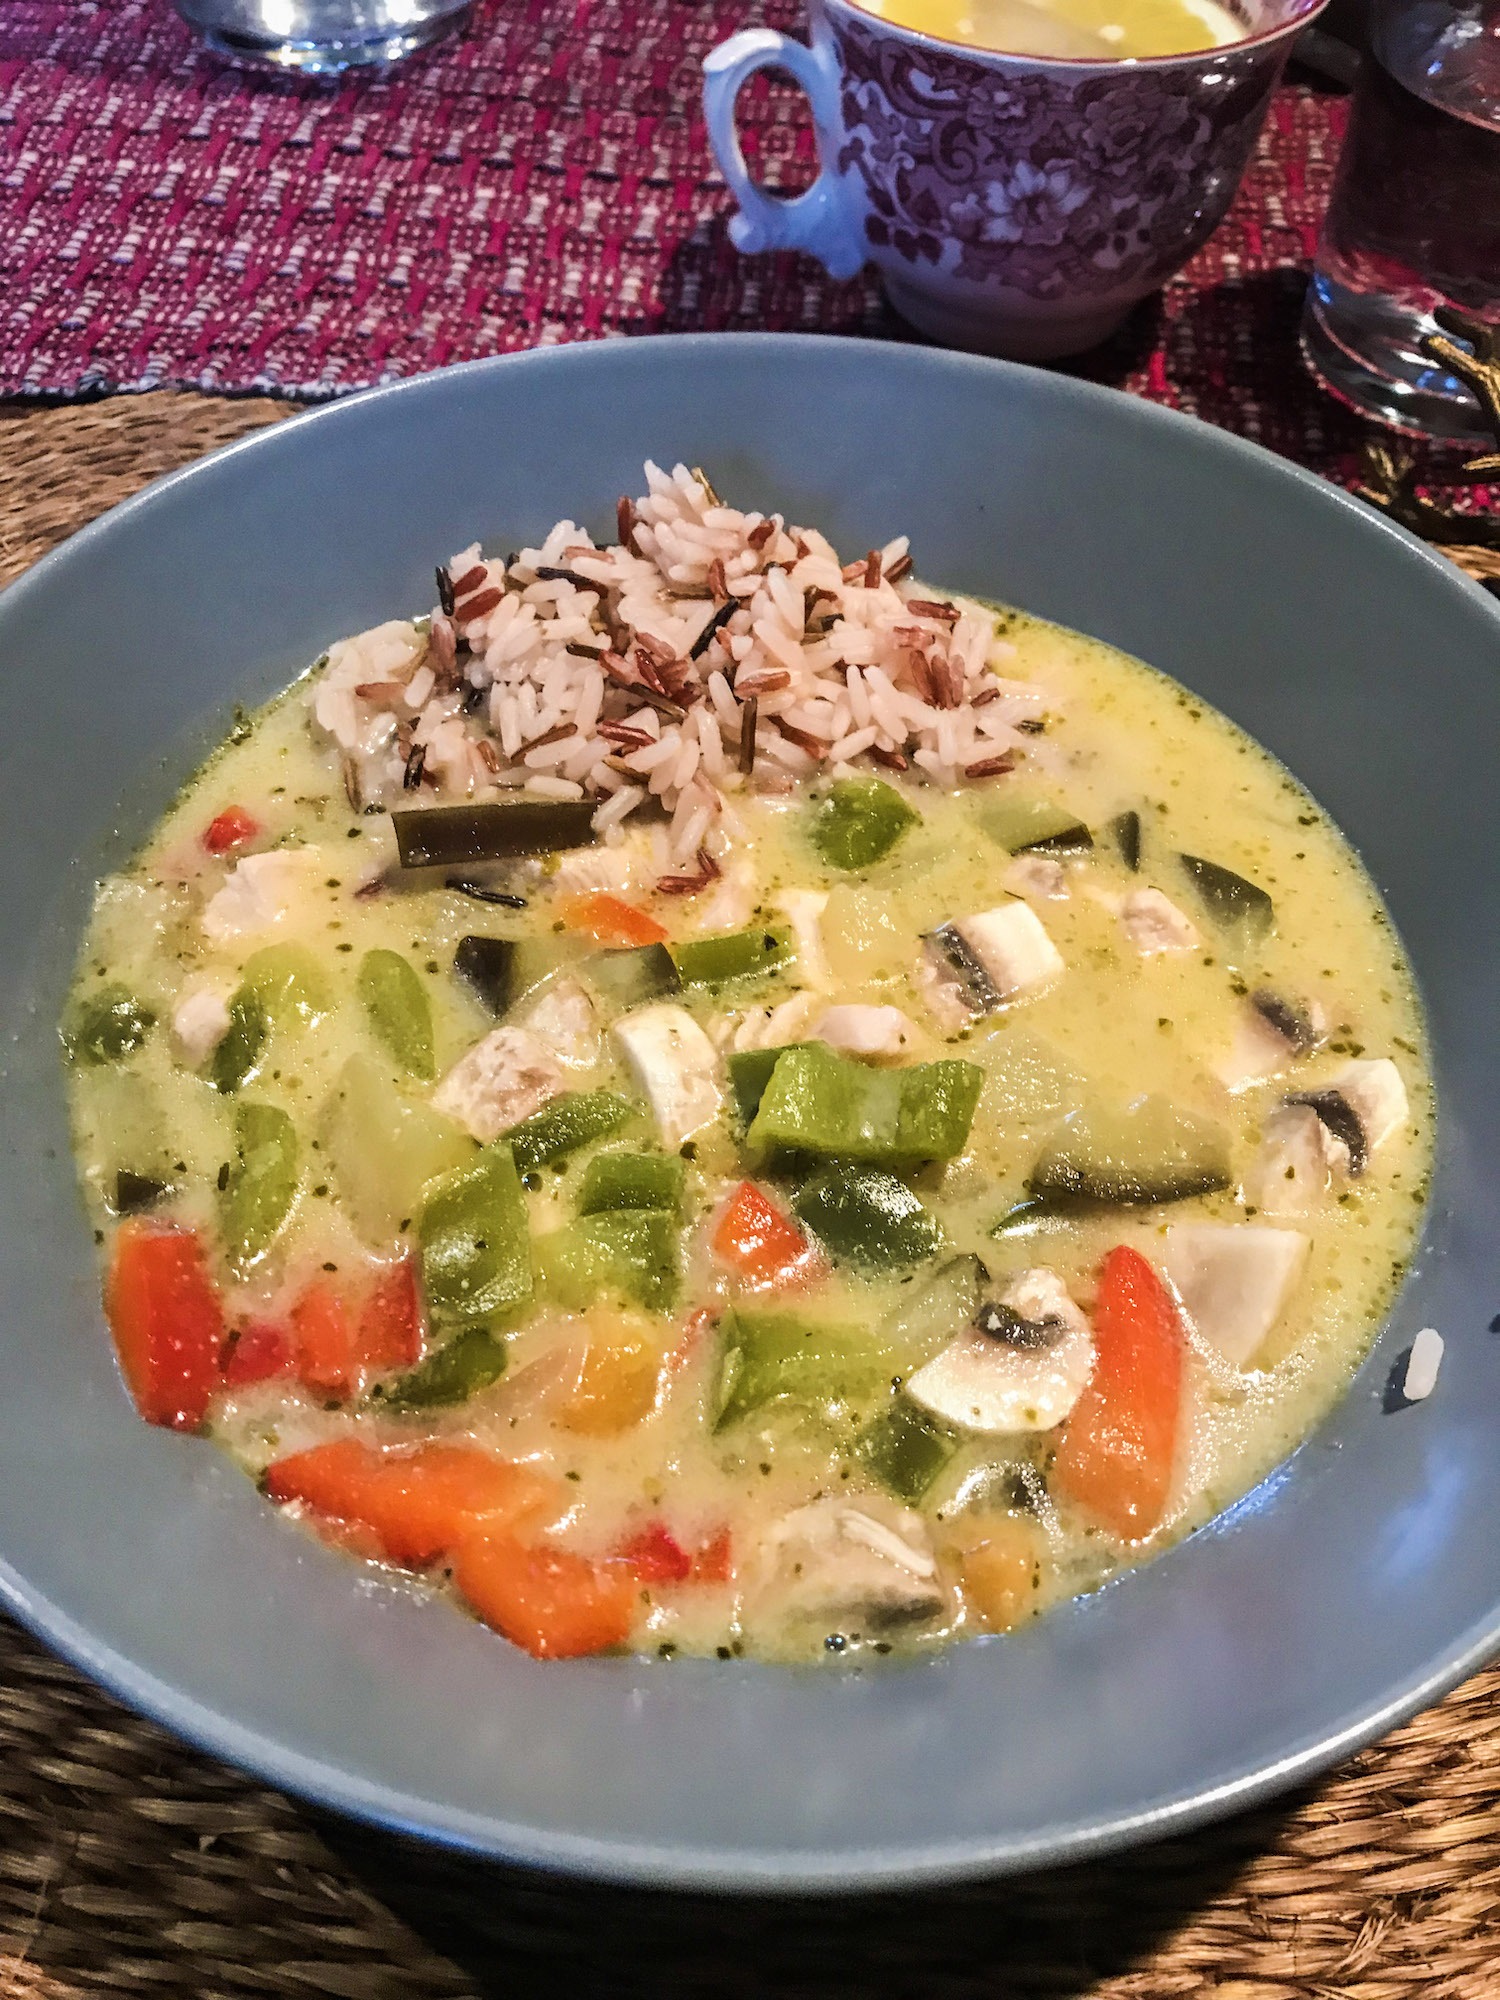 Thai Green Curry | How much weight can you lose on a week boot camp? | We headed to Who Dares Slims in Andalucia, Spain to see how much weight we could lose in just one week with extreme military led fitness and a controlled diet | Fitness Blog | Elle Blonde Luxury Lifestyle Destination Blog